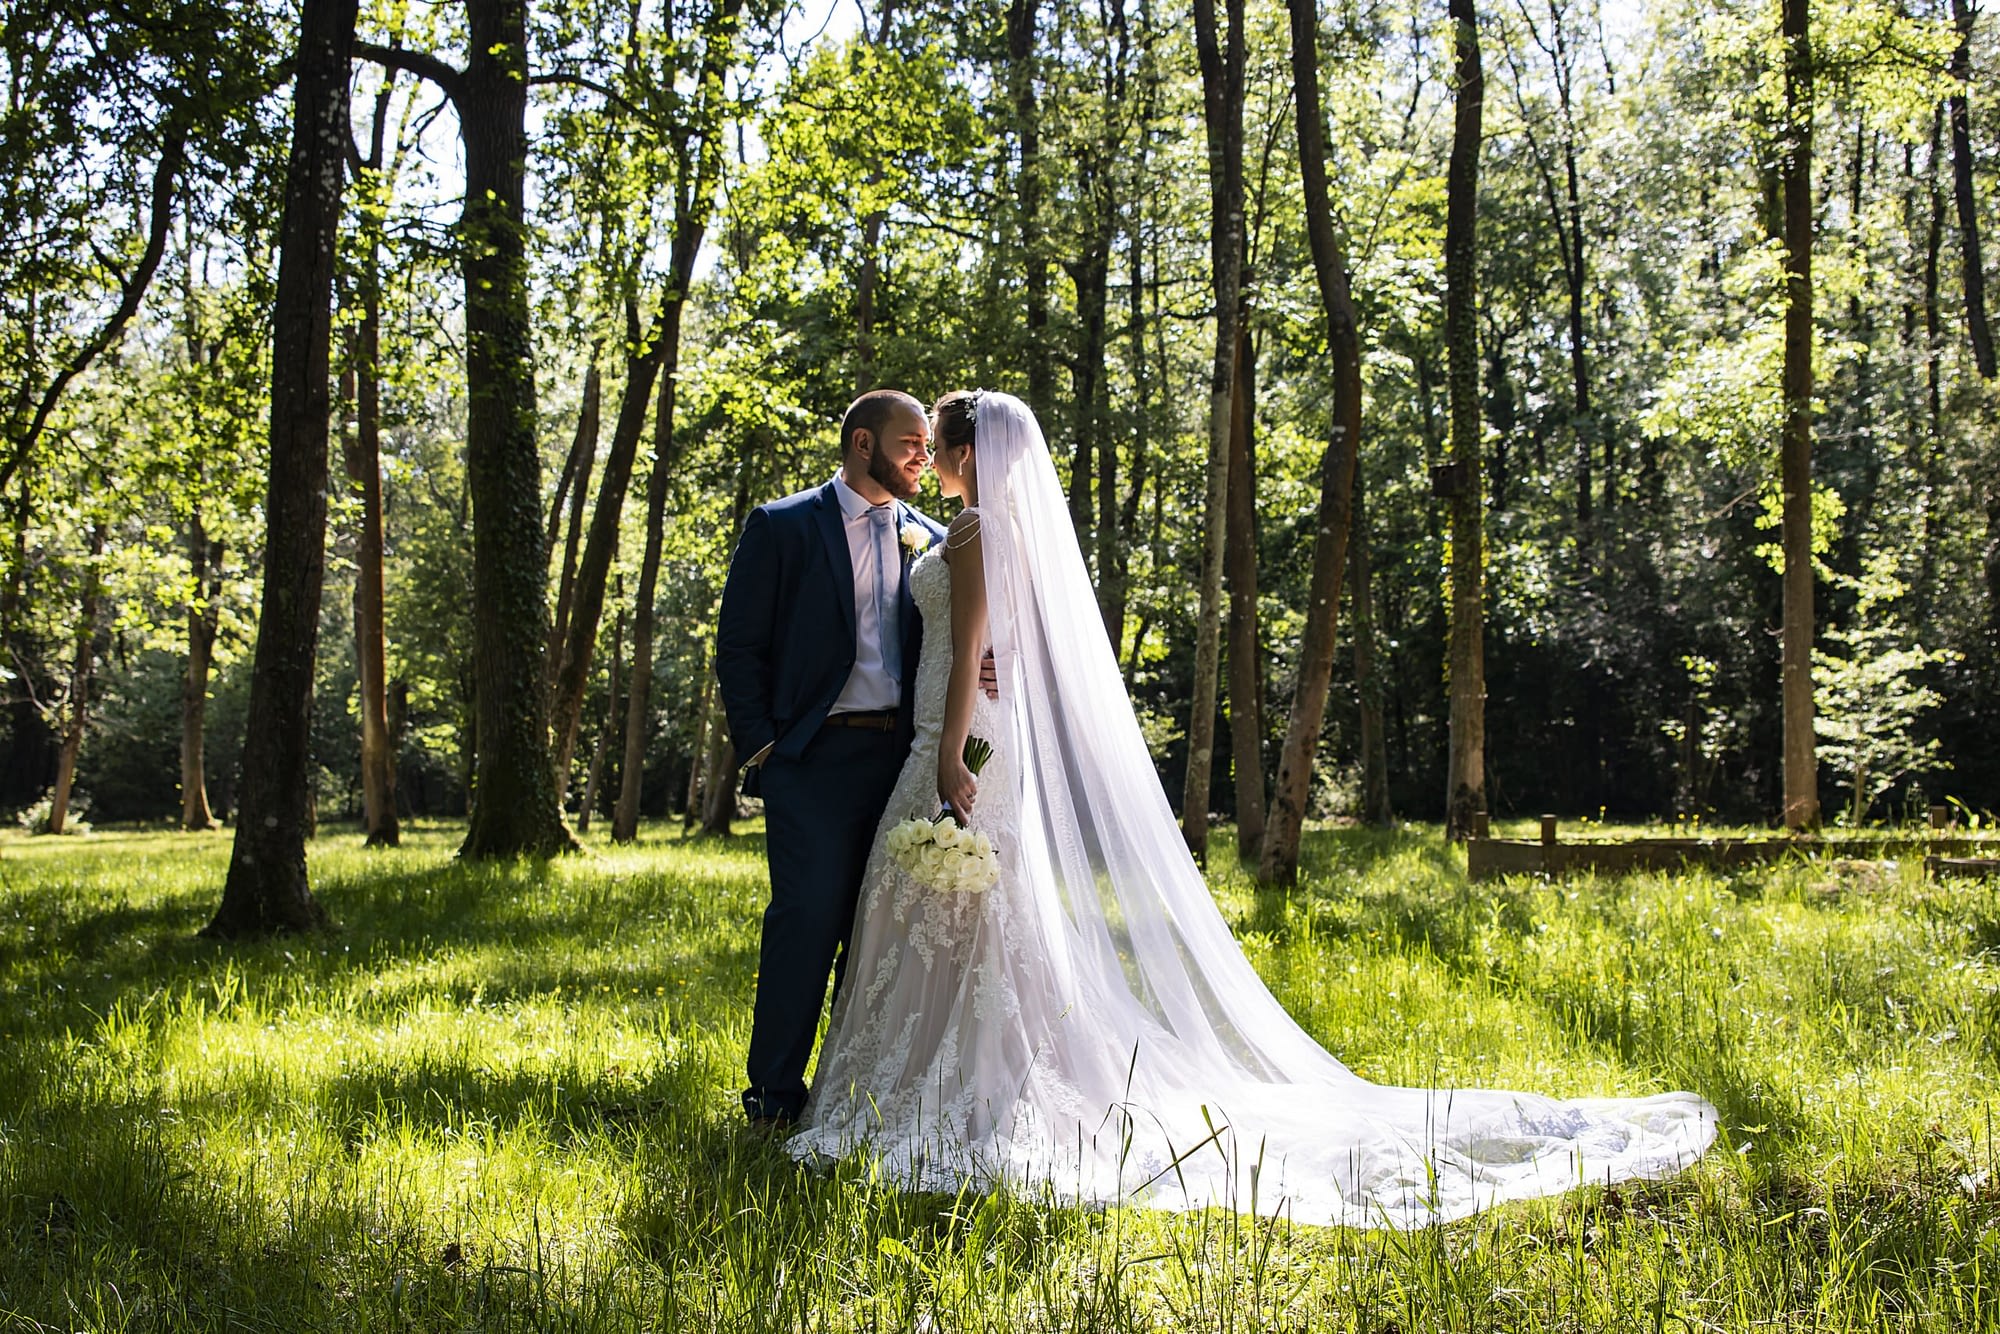 couple standing together in a forest clearing on a sunny day